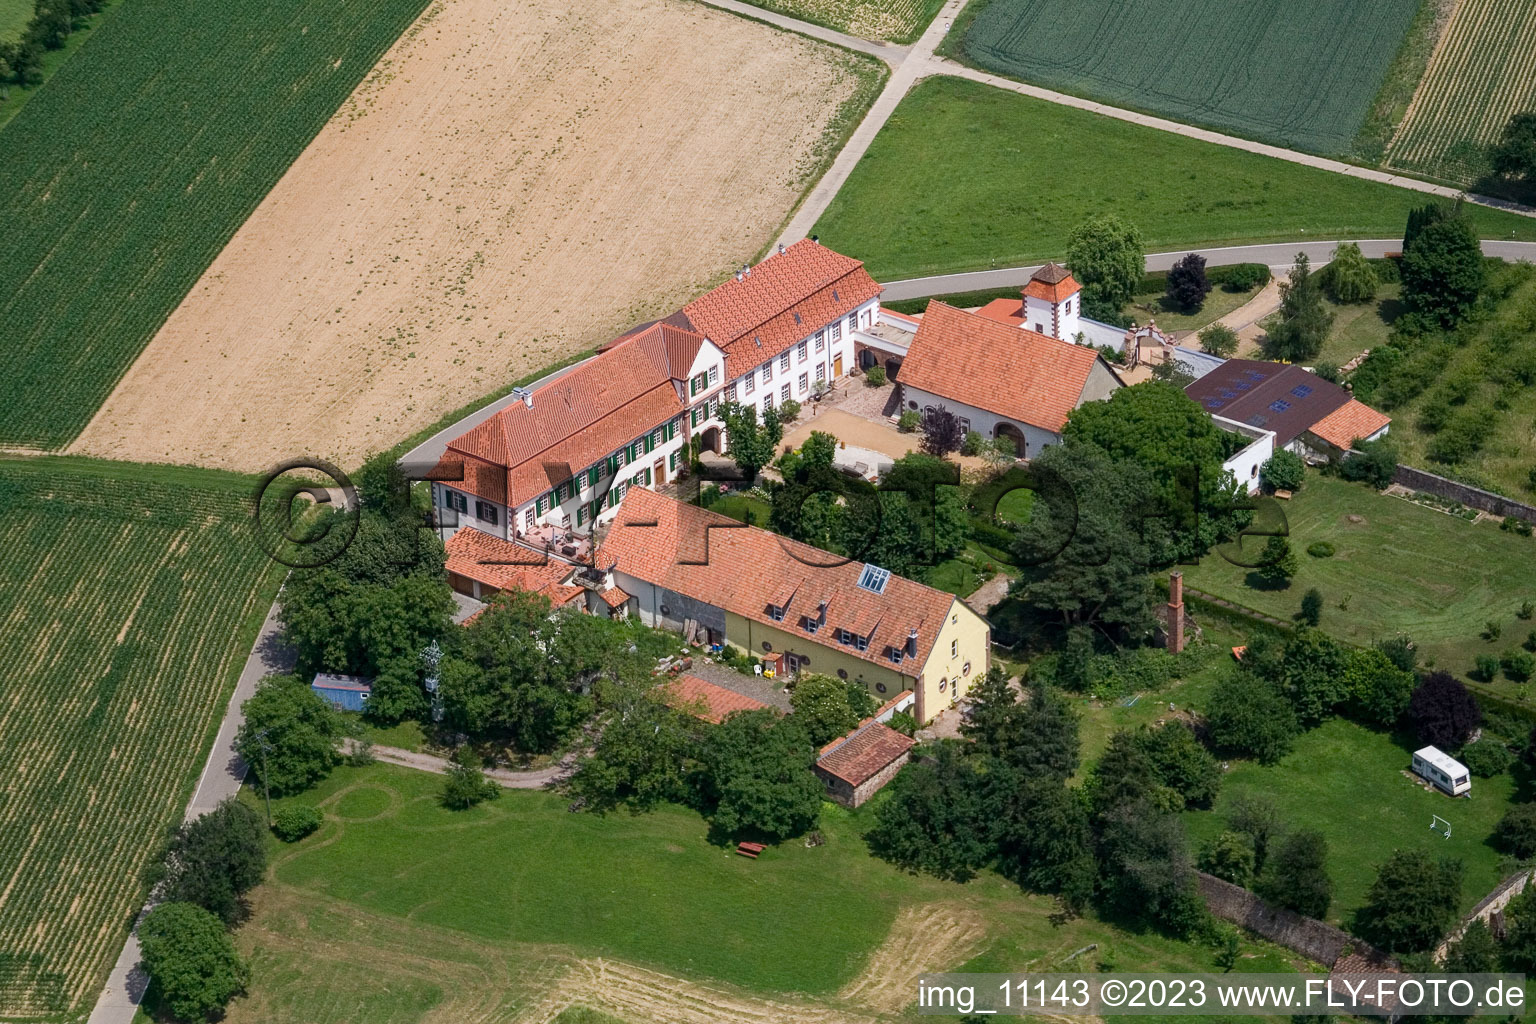 Aerial photograpy of Workshop for Assisted Living of hidden Talents GmbH in the district Haftelhof in Schweighofen in the state Rhineland-Palatinate, Germany